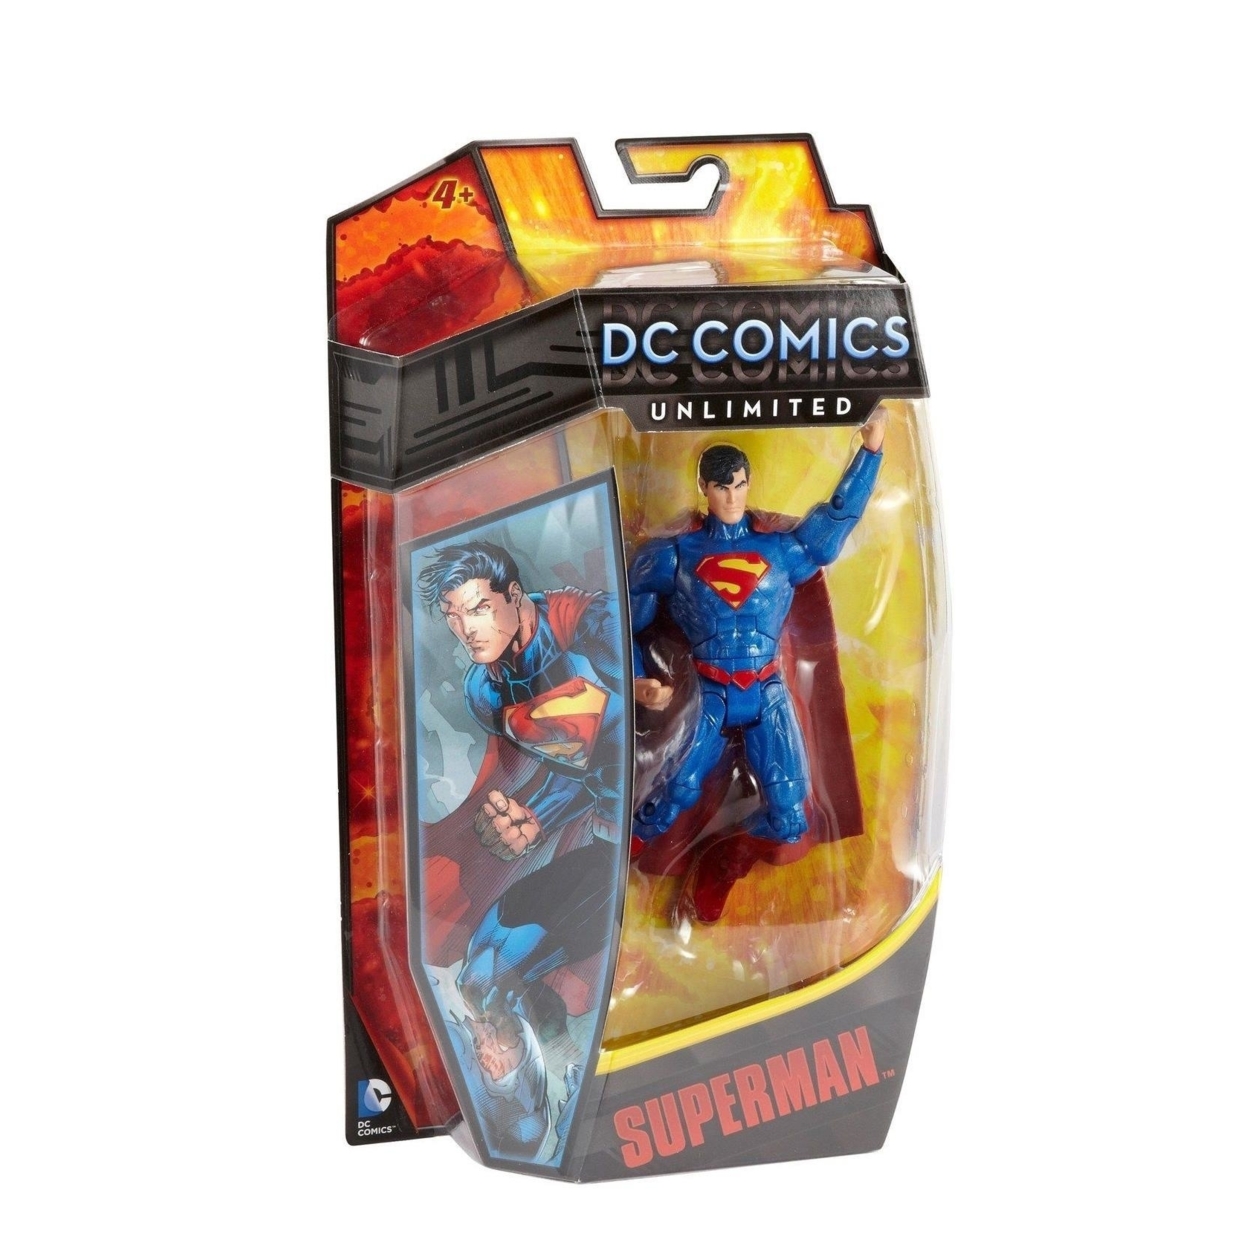 DC Comics Unlimited Superman Action Figure Collector Toy Justice Hero Mattel - image 3 of 4